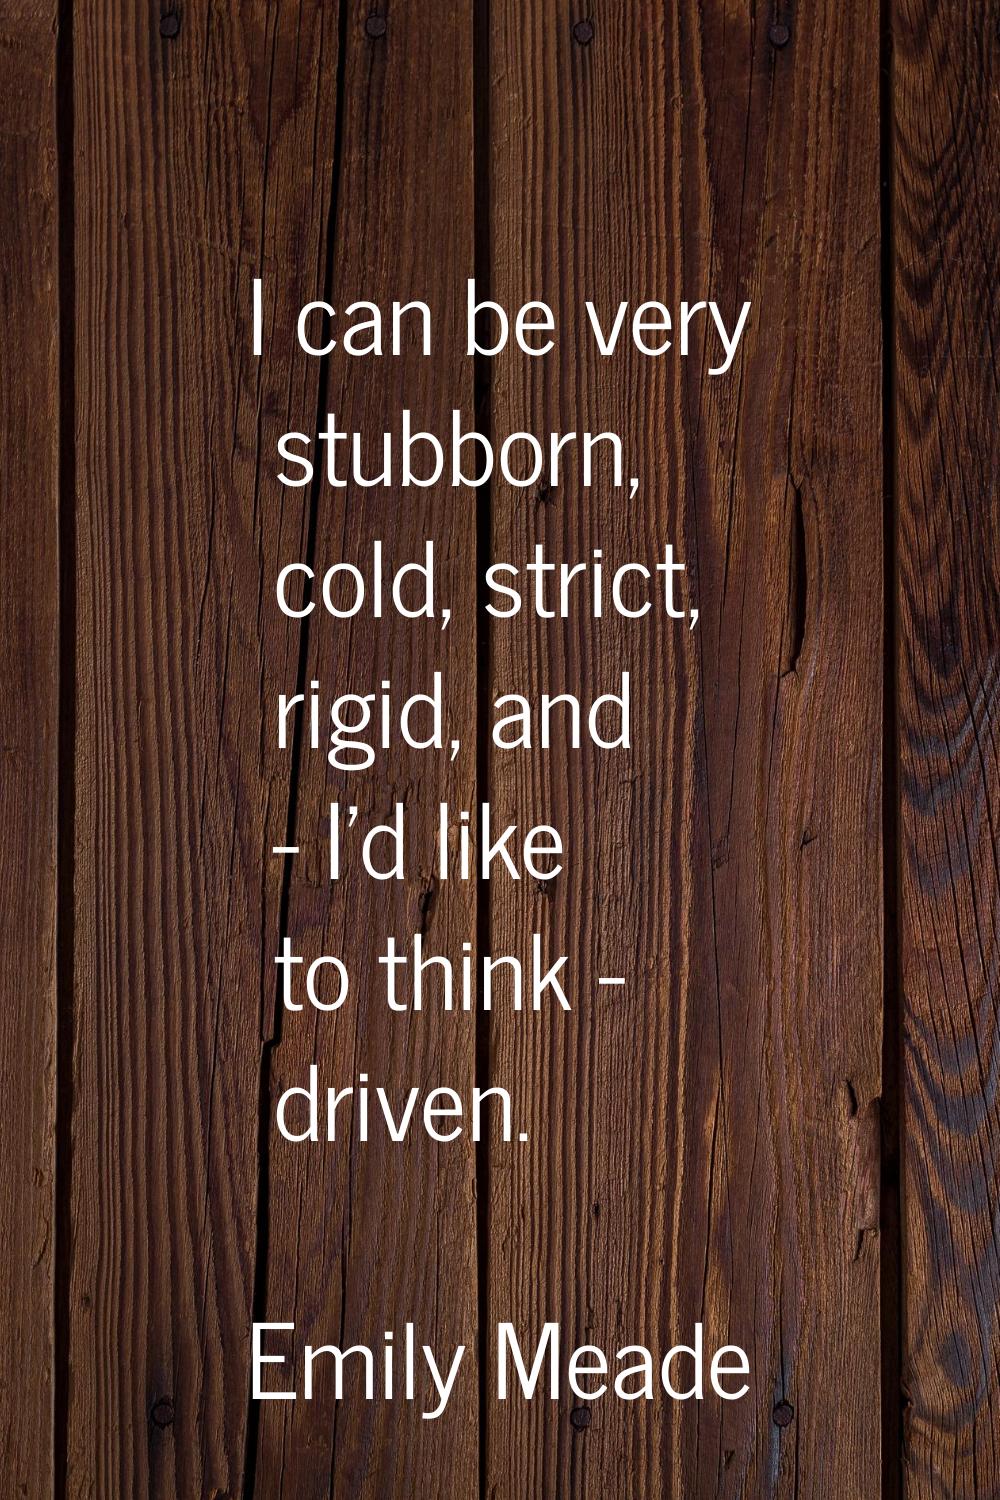 I can be very stubborn, cold, strict, rigid, and - I'd like to think - driven.